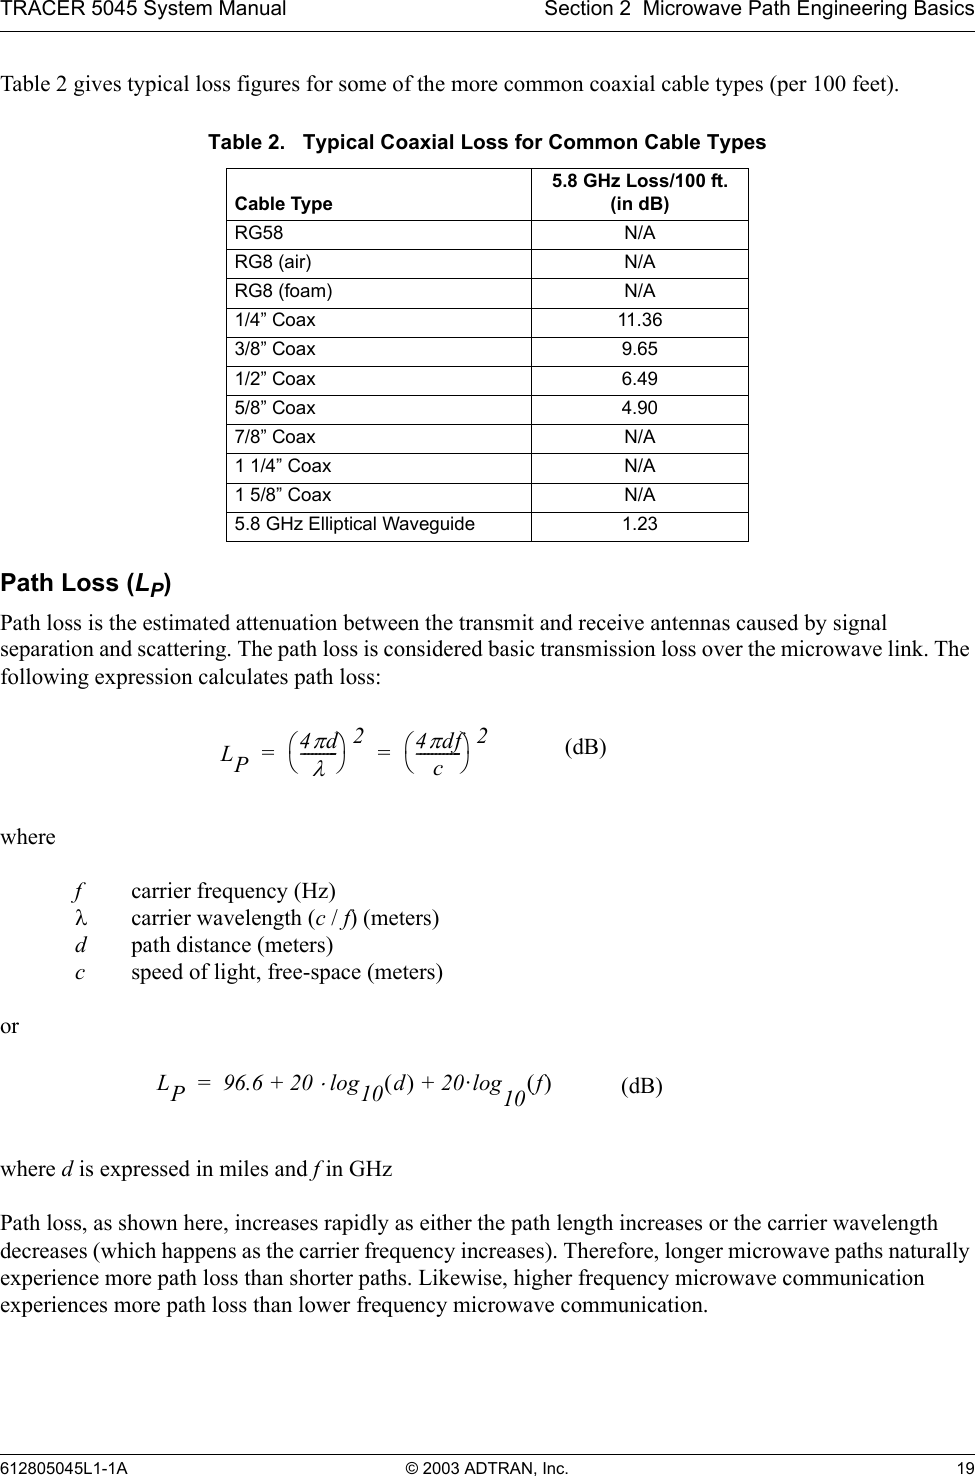 TRACER 5045 System Manual Section 2  Microwave Path Engineering Basics612805045L1-1A © 2003 ADTRAN, Inc. 19Table 2 gives typical loss figures for some of the more common coaxial cable types (per 100 feet).Path Loss (LP)Path loss is the estimated attenuation between the transmit and receive antennas caused by signal separation and scattering. The path loss is considered basic transmission loss over the microwave link. The following expression calculates path loss:where fcarrier frequency (Hz)λcarrier wavelength (c / f) (meters)dpath distance (meters)cspeed of light, free-space (meters)orwhere d is expressed in miles and f in GHzPath loss, as shown here, increases rapidly as either the path length increases or the carrier wavelength decreases (which happens as the carrier frequency increases). Therefore, longer microwave paths naturally experience more path loss than shorter paths. Likewise, higher frequency microwave communication experiences more path loss than lower frequency microwave communication.Table 2.   Typical Coaxial Loss for Common Cable TypesCable Type5.8 GHz Loss/100 ft. (in dB)RG58 N/ARG8 (air) N/ARG8 (foam) N/A1/4” Coax 11.363/8” Coax 9.651/2” Coax 6.495/8” Coax 4.907/8” Coax N/A1 1/4” Coax N/A1 5/8” Coax N/A5.8 GHz Elliptical Waveguide 1.23LP4πdλ----------24πdfc------------2== (dB)LP96.6 20 log10 d() 20·log+10 f()⋅+= (dB)